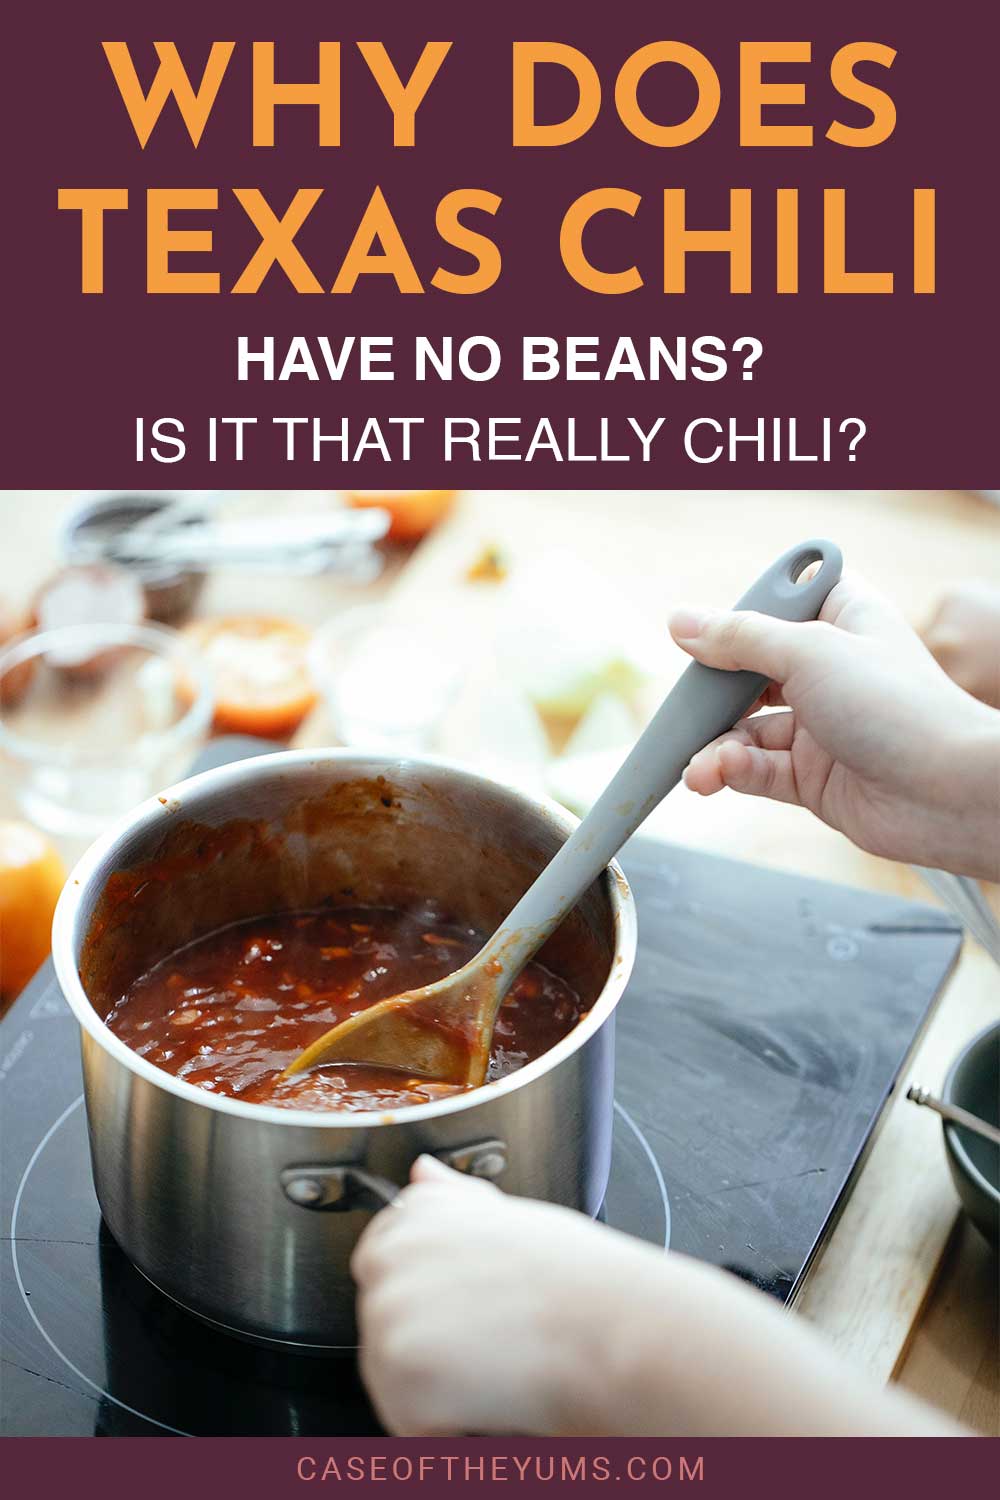 Woman cooking clili in pan - Why Does Texas Chili Have No Beans? Is it really chili?